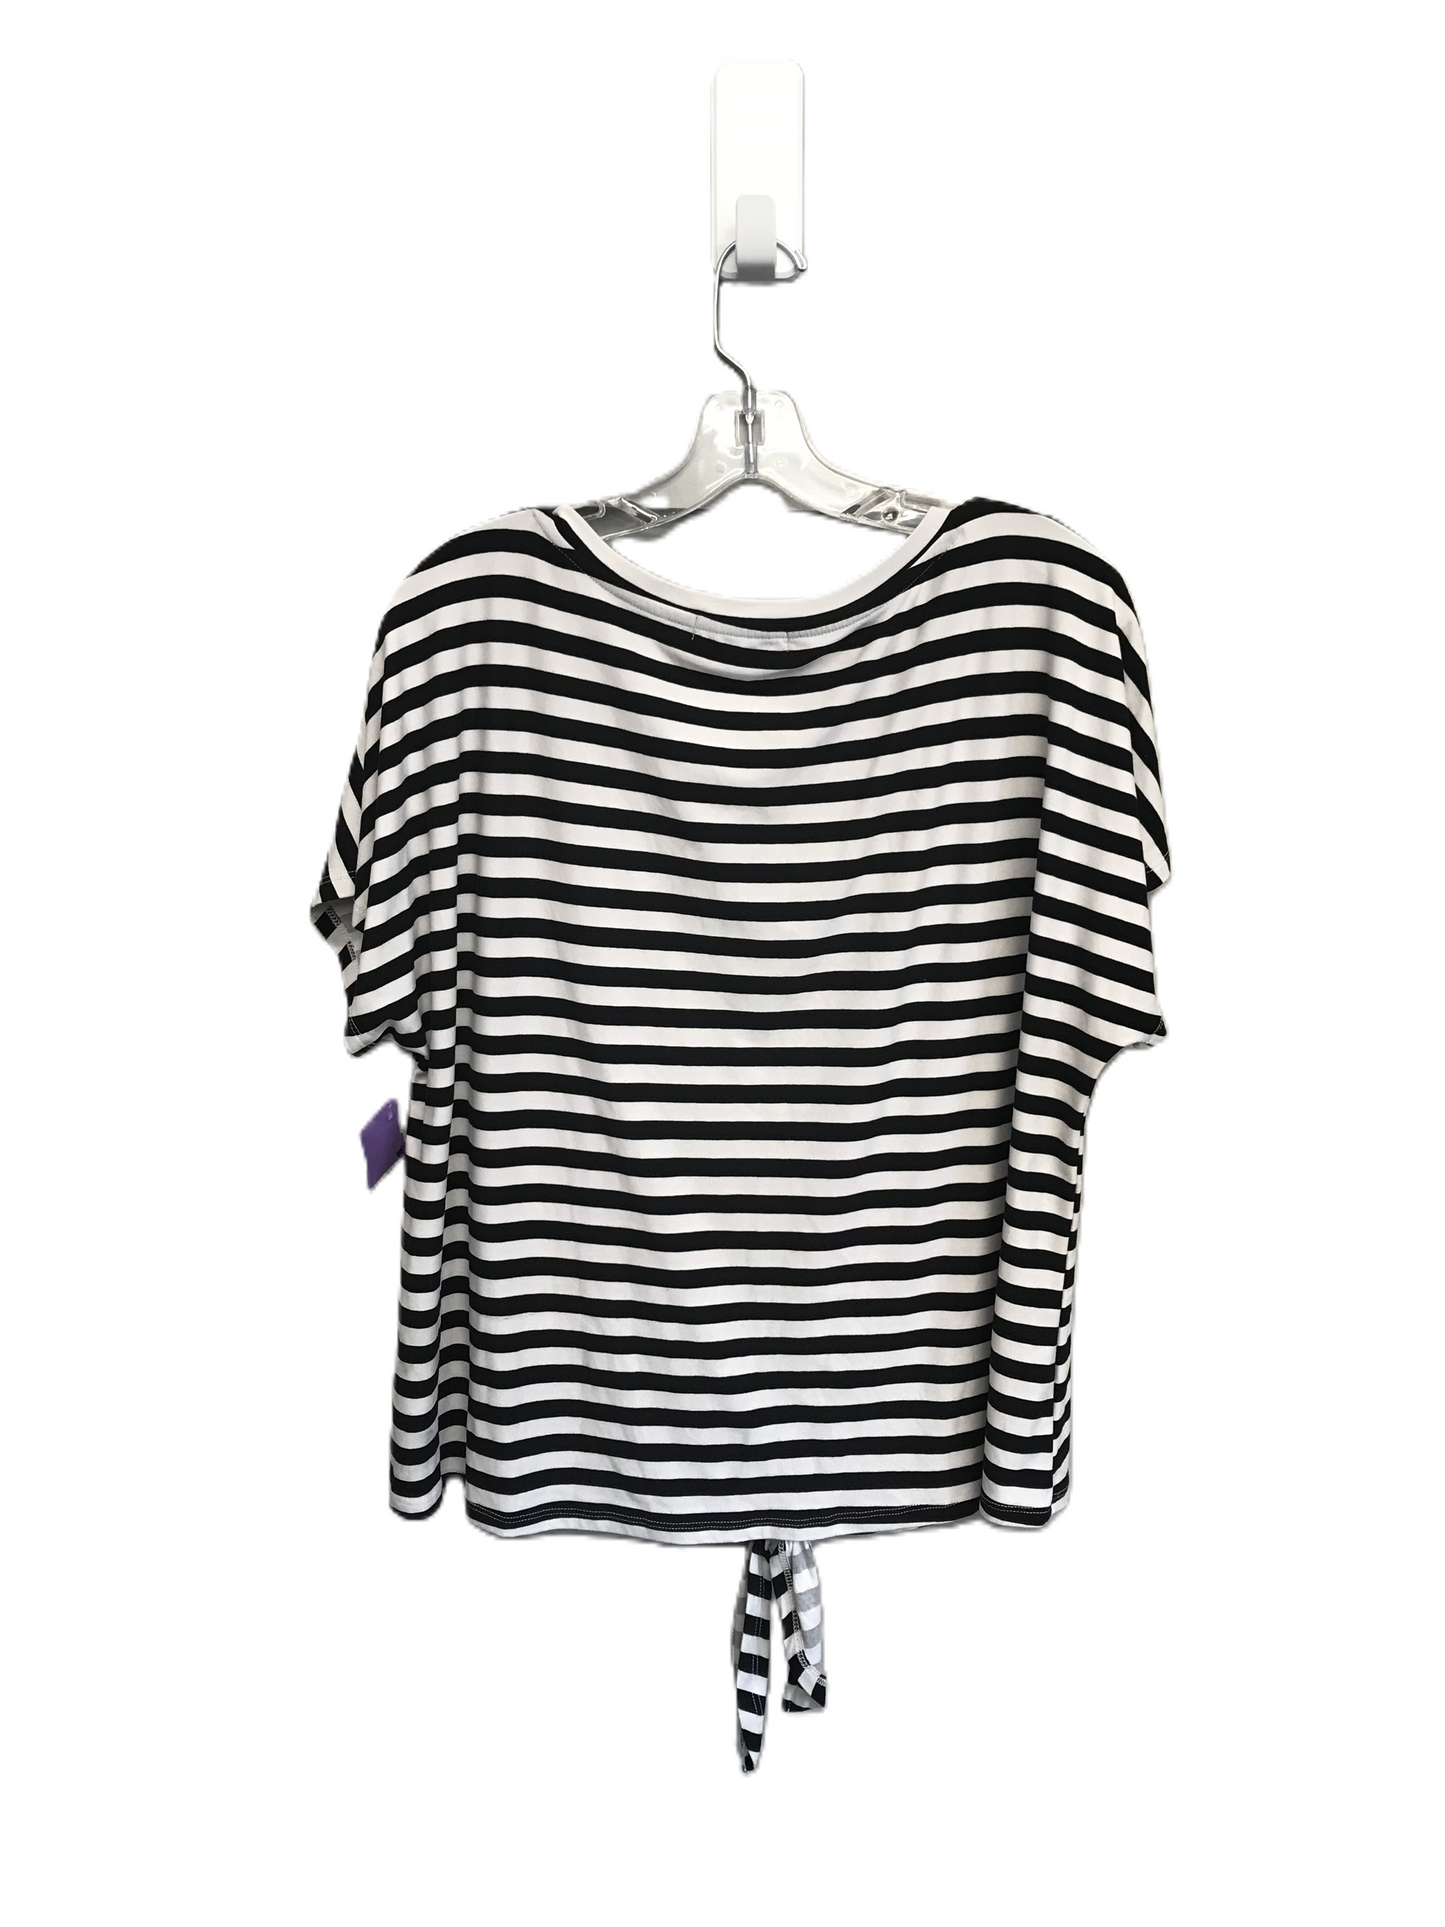 Black & White Top Short Sleeve By Full Circle Size: 2x